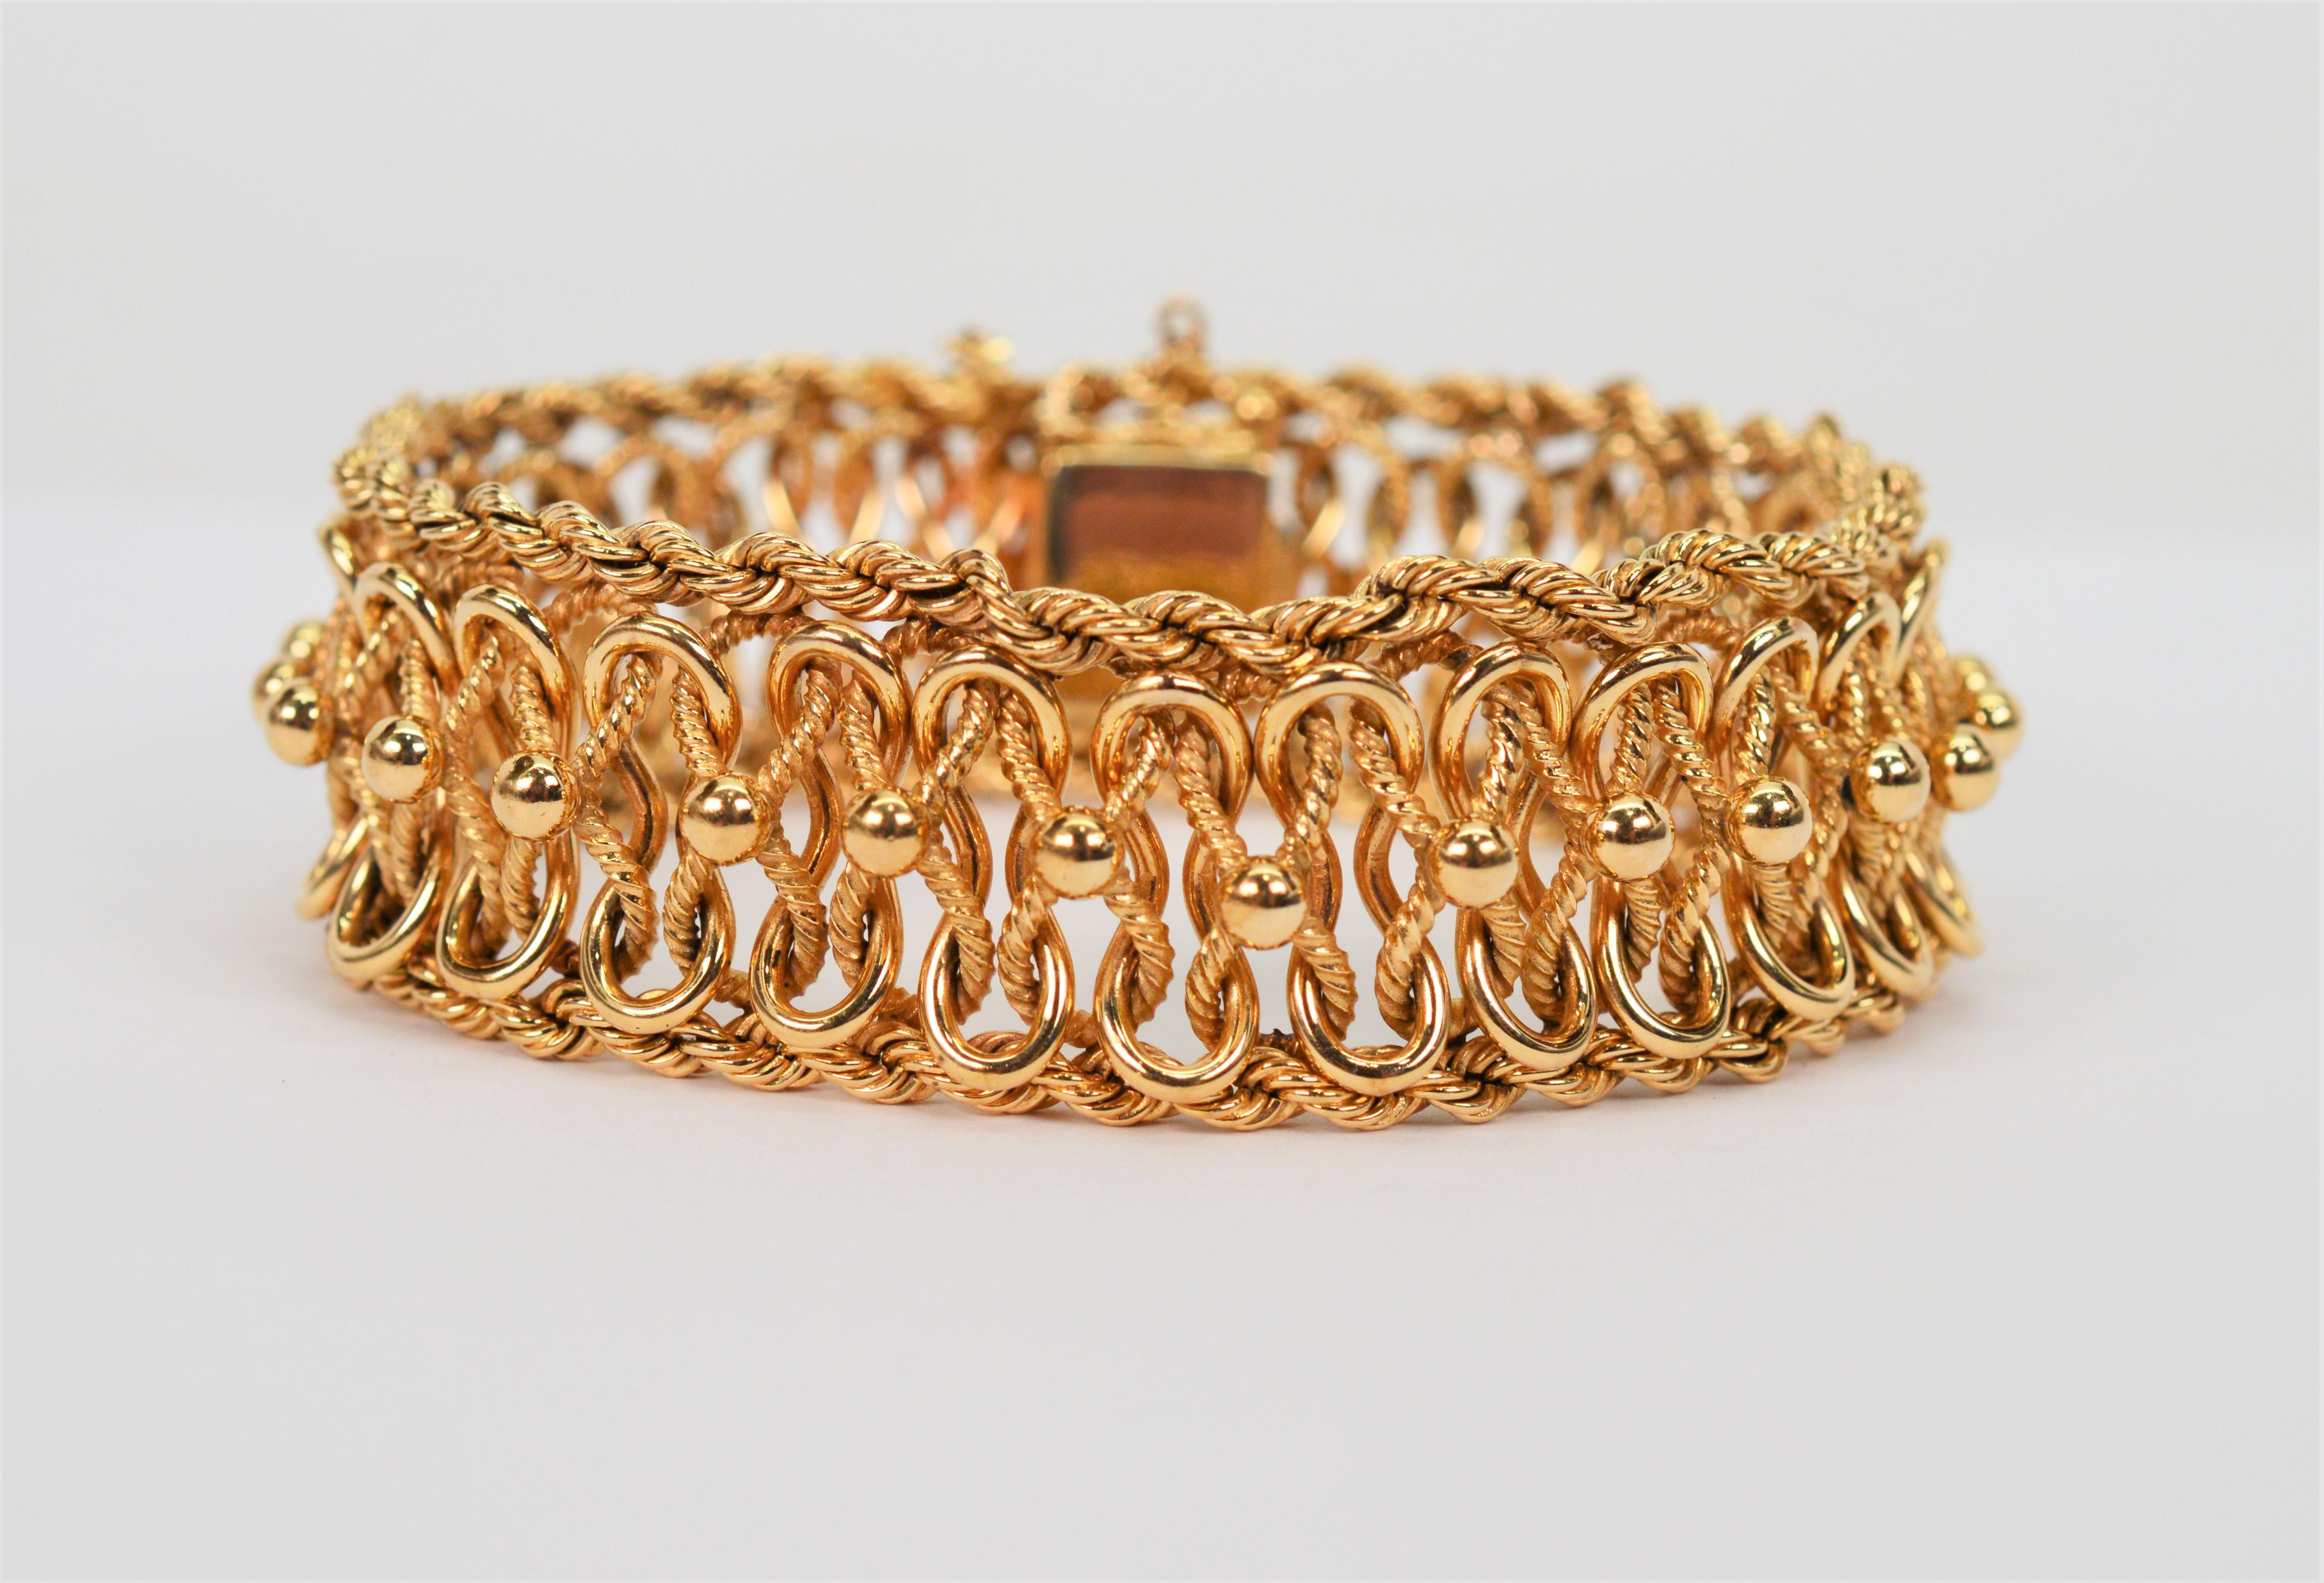 The fabulous workmanship of this quality 1950's Retro style bracelet is displayed by the intricate design of the custom woven 14 karat yellow gold links that are meticulously framed with gold roping. Wildly popular mid- century, this retro style